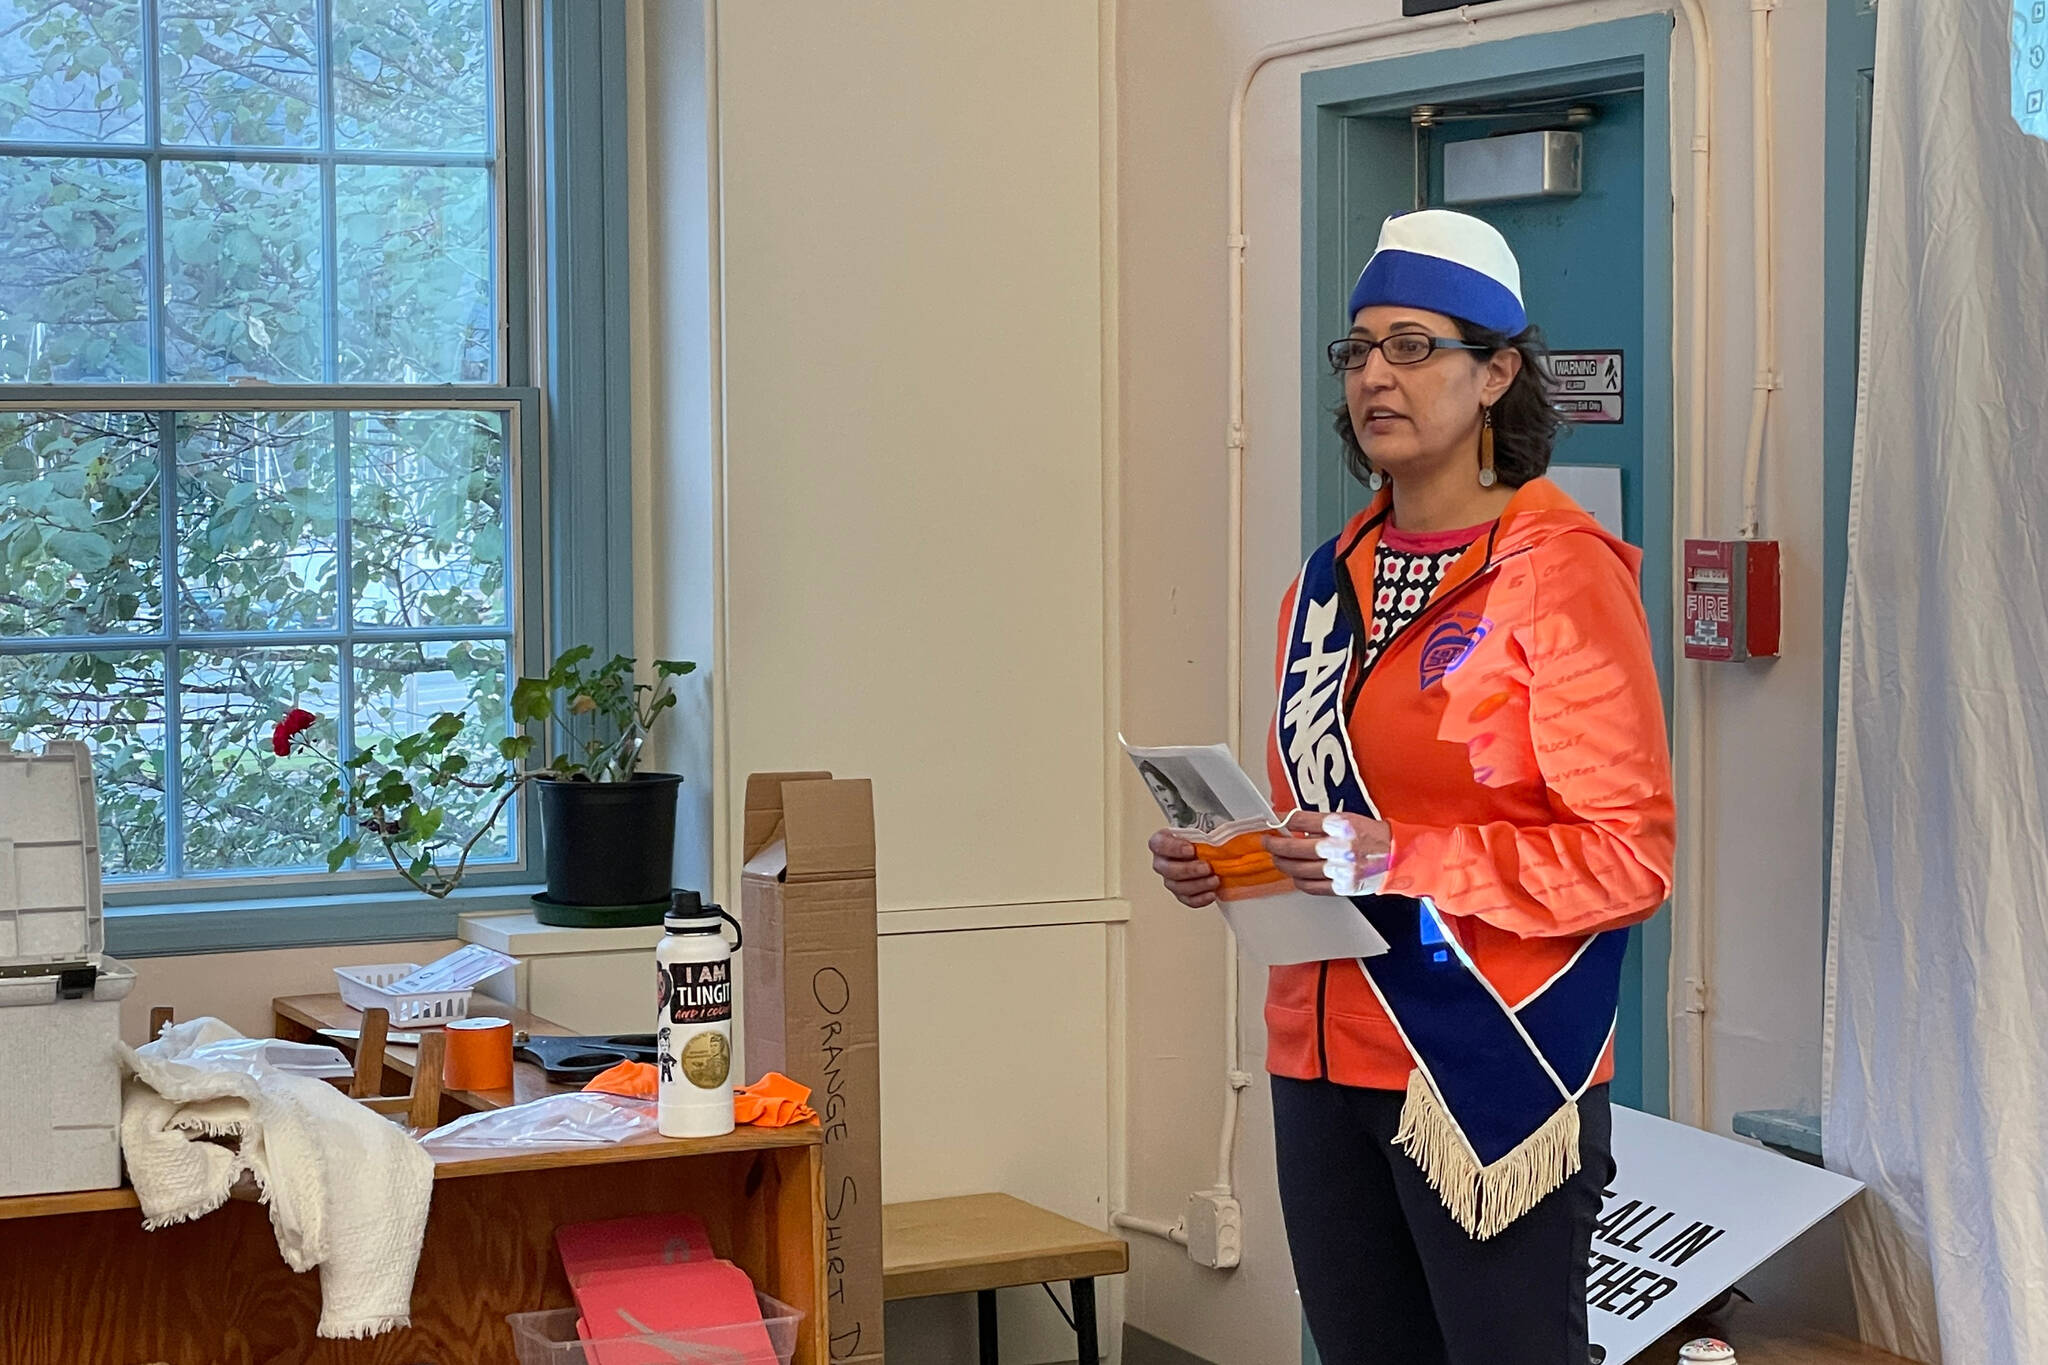 Jamiann Hasselquist, vice president of Alaska Native Sisterhood Camp 2, speaks to an invited crowd at the Juneau Montessori School about Orange Shirt Day, a day of remembrance for the victims of residential school systems for Indigenous people in Canada and the United States on Sept. 28, 2021. (Michael S. Lockett / Juneau Empire)